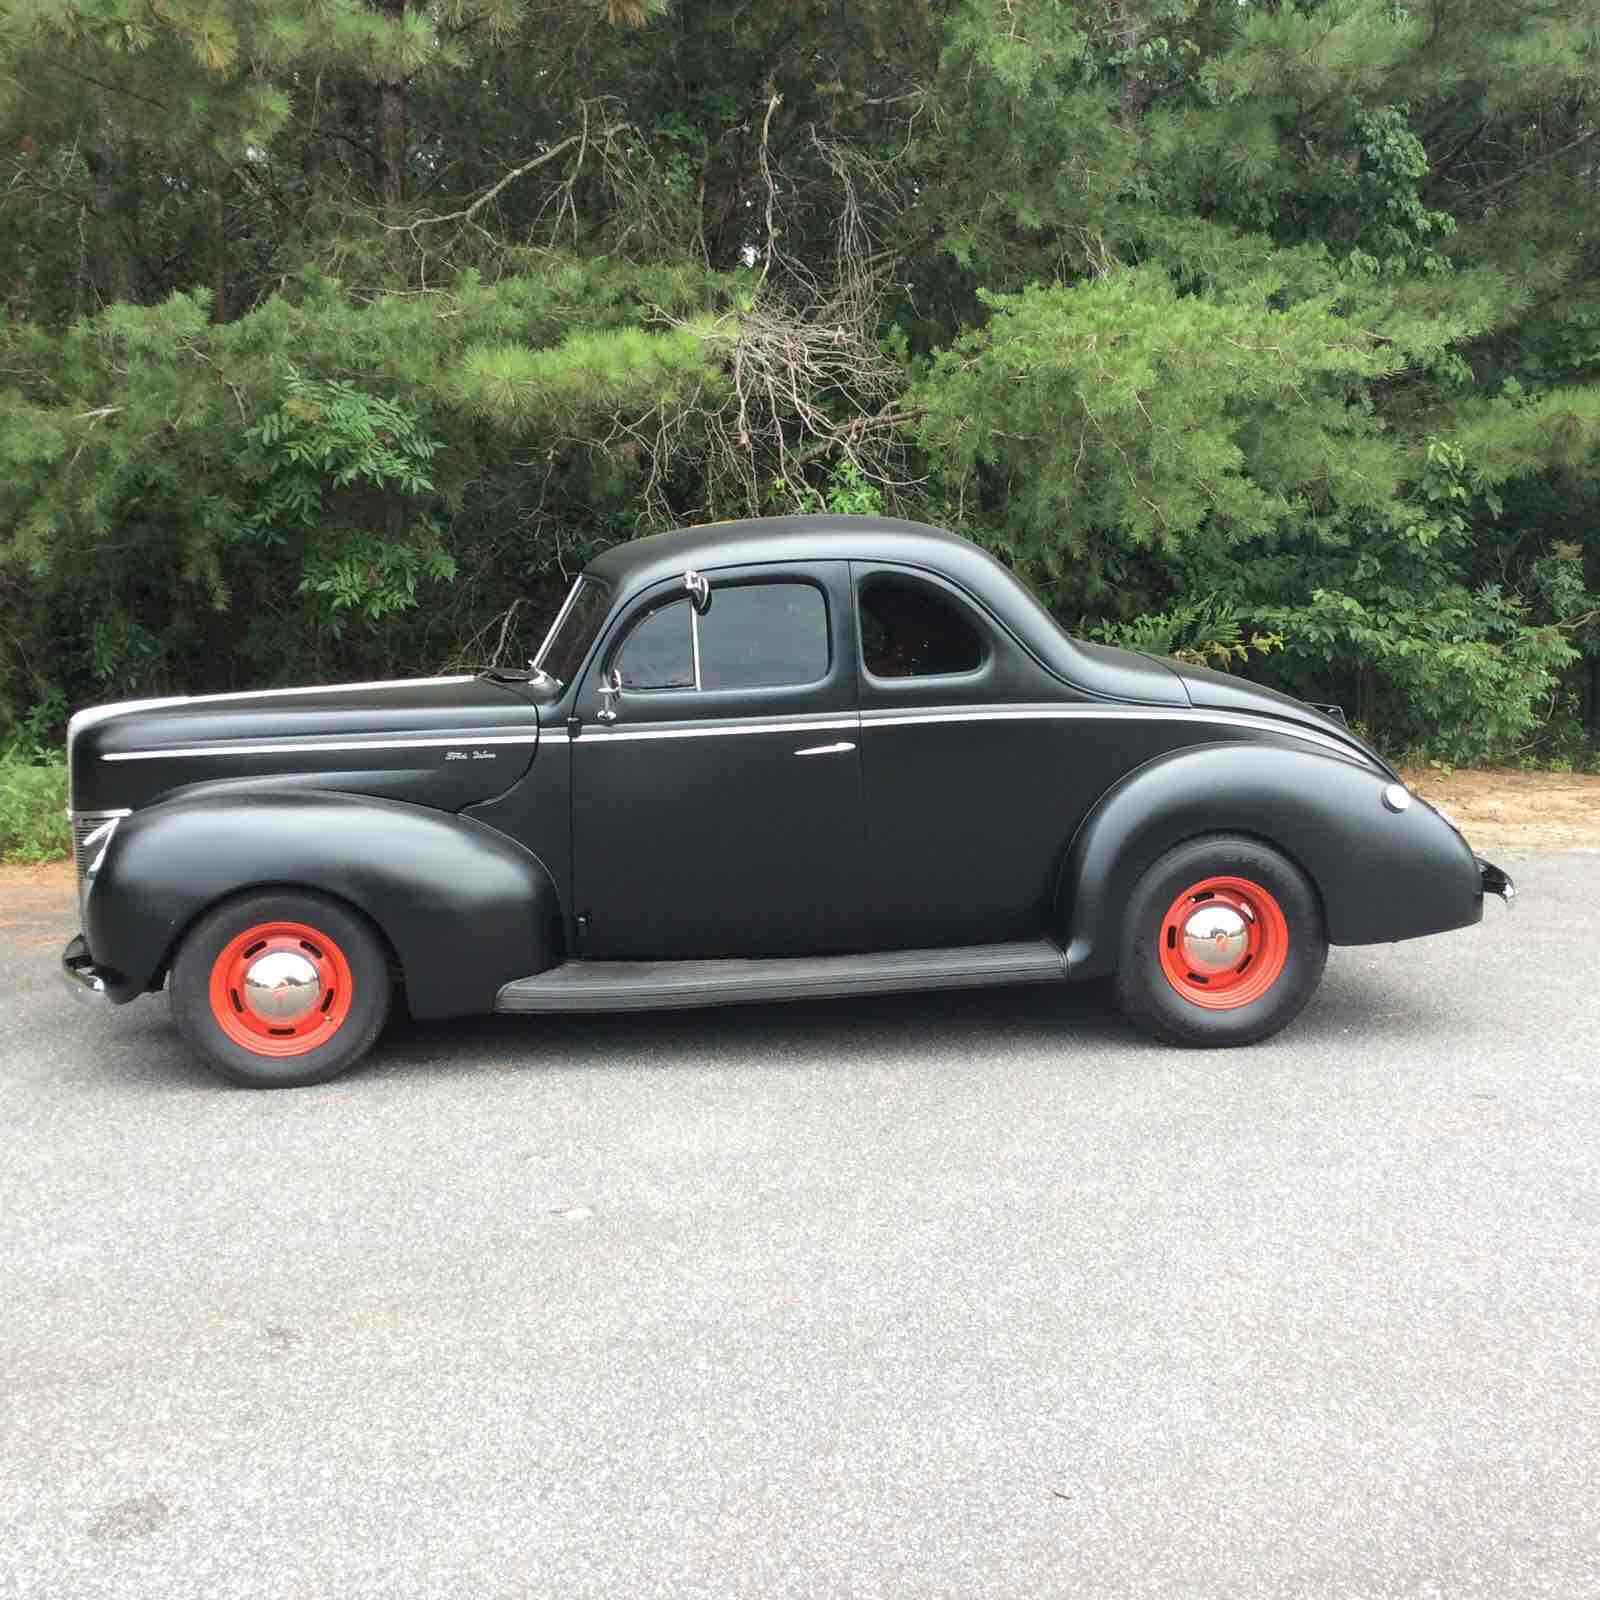 1940 Ford Deluxe deluxe